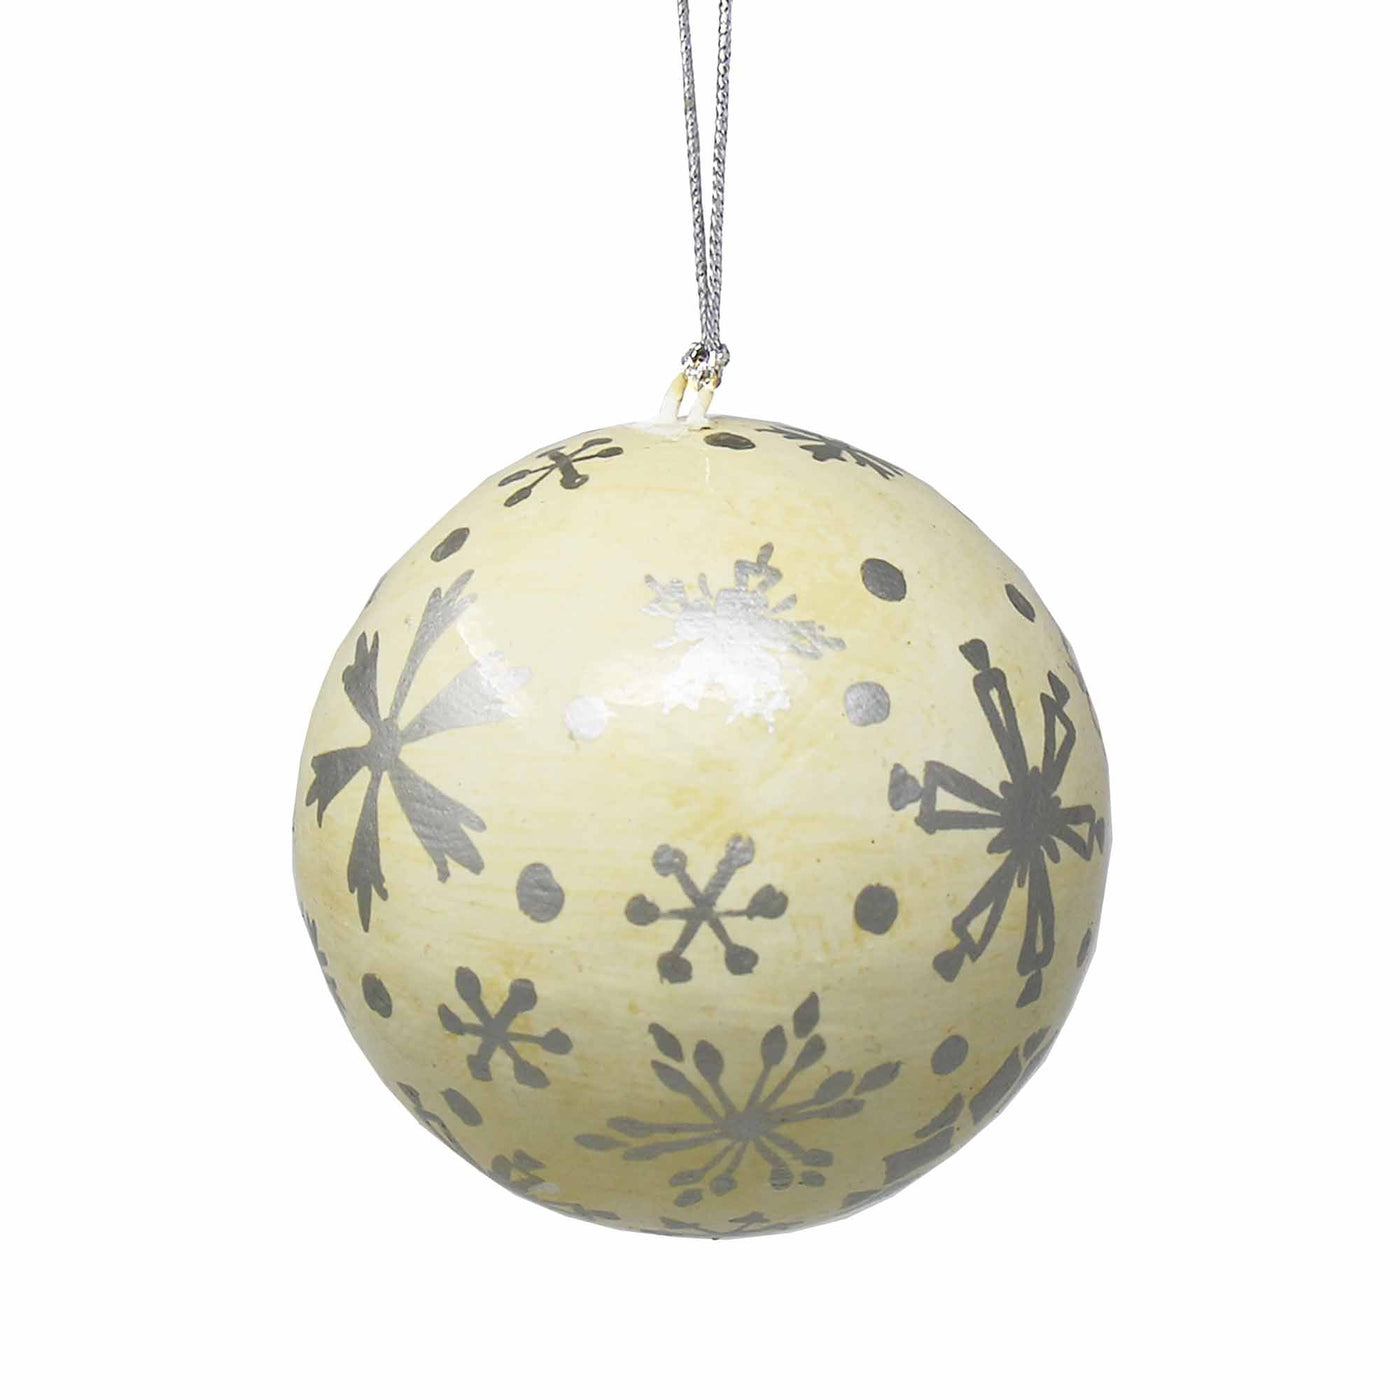 Handpainted Ornament Silver Snowflakes - Yvonne’s 100th Wish Inc